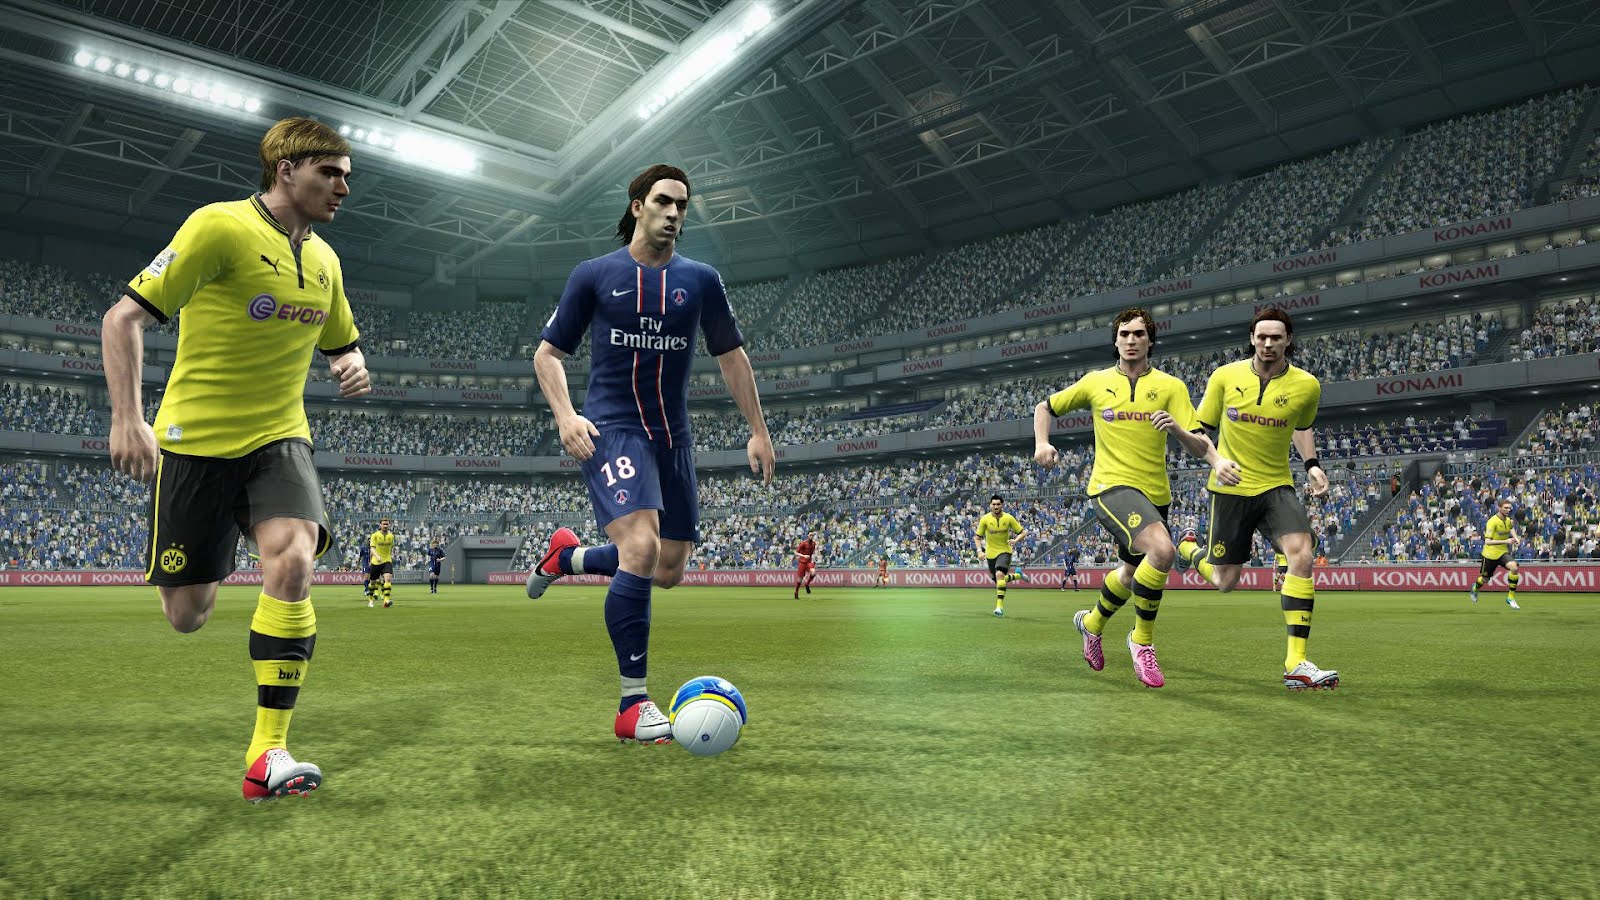 Pes 2013 free. download full version for pc